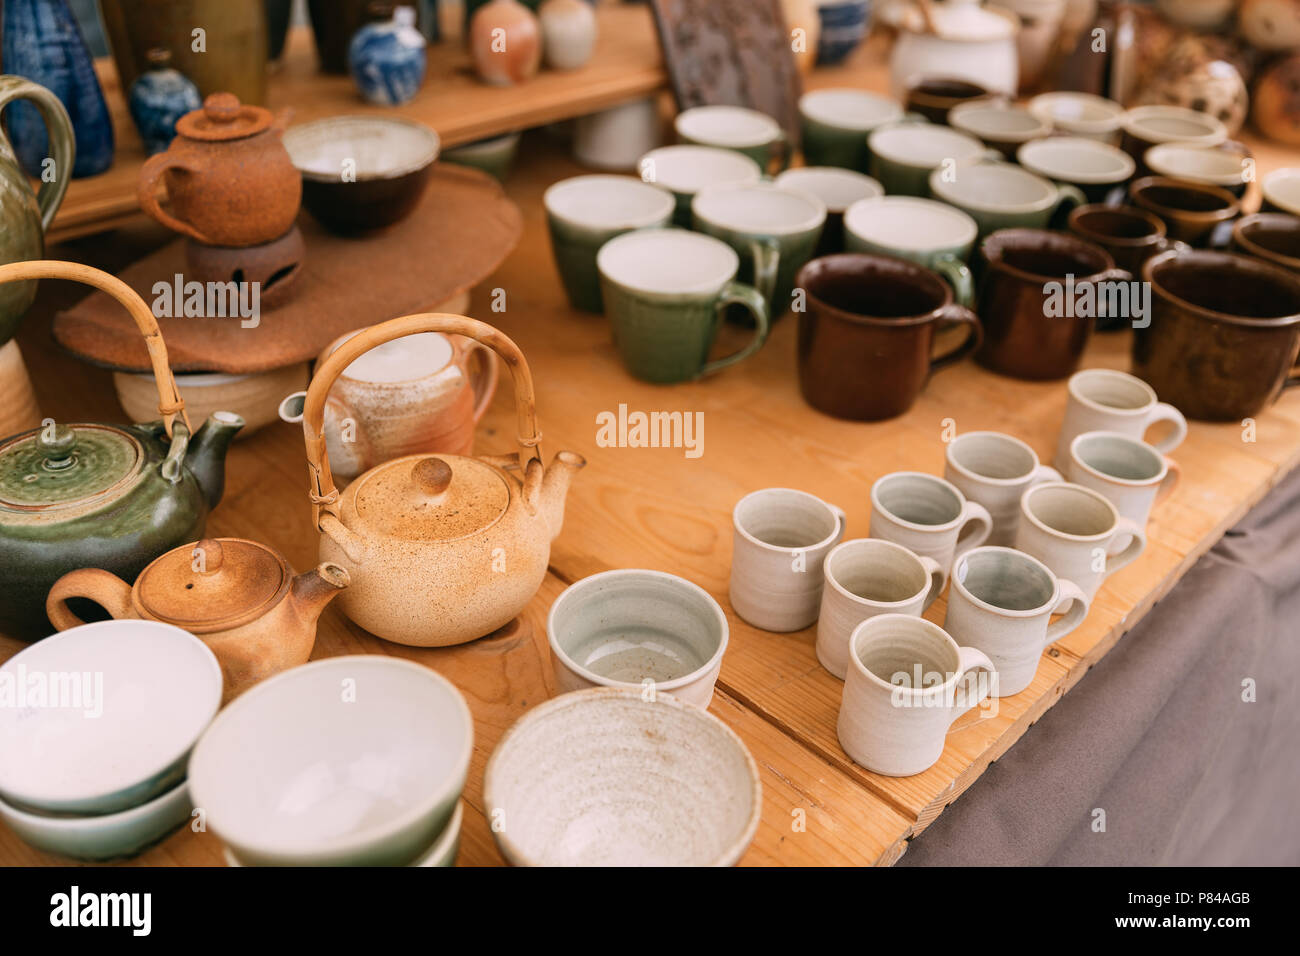 Ceramic Clay Crafts. Ceramic Dishware In Market. Bowls, Kettle, Cups Of Different Sizes, Colors And Shapes. Stock Photo